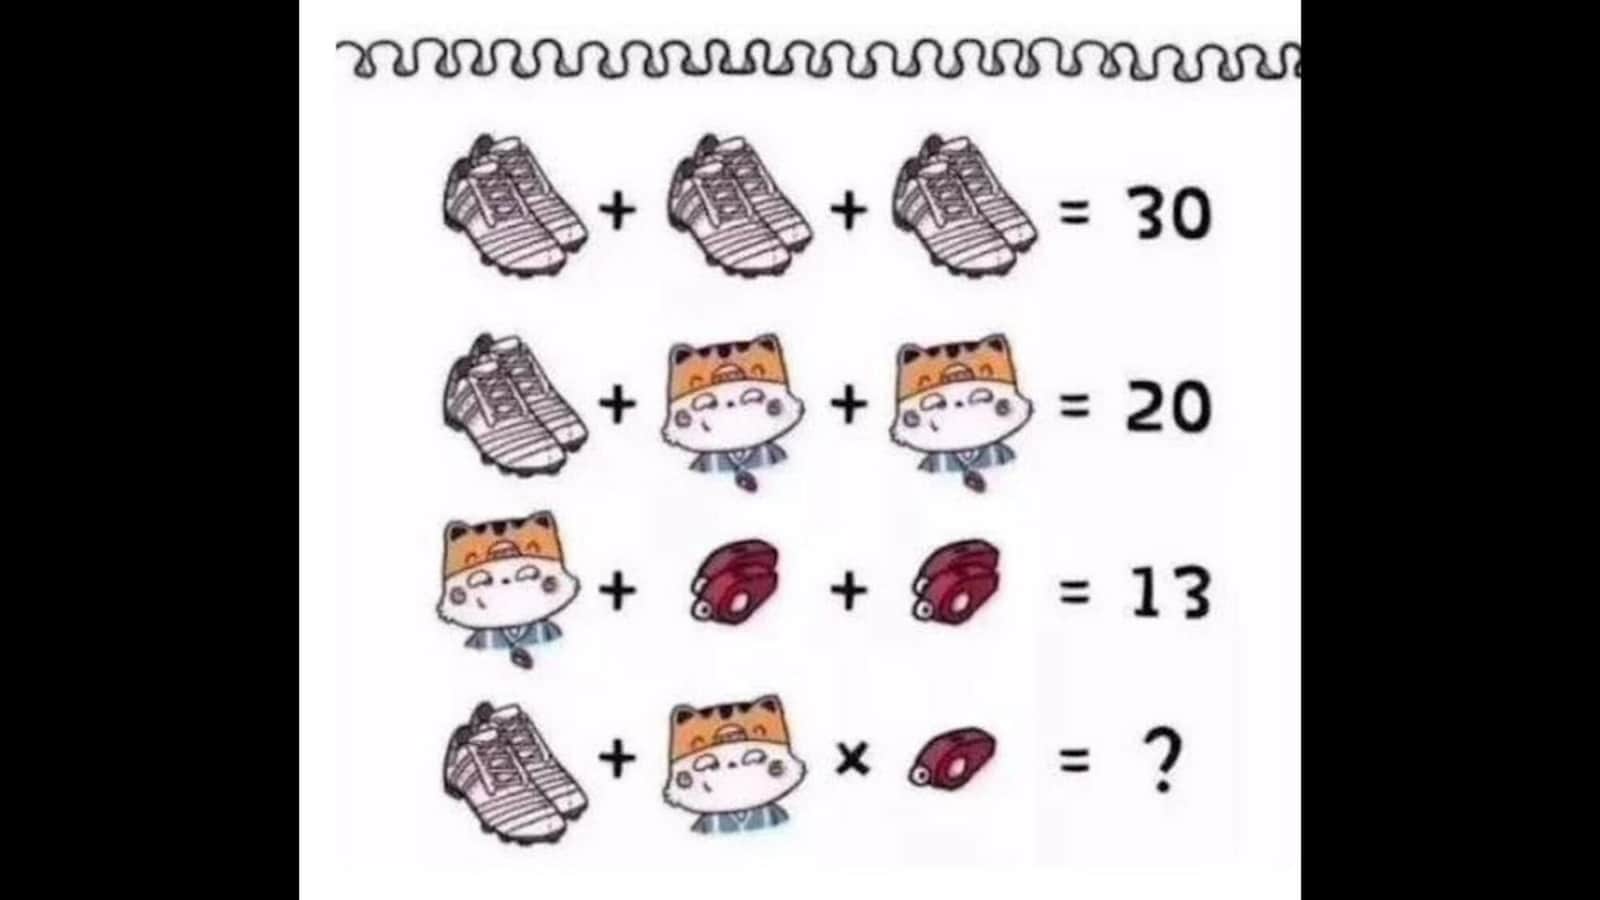 You’re a maths genius if you can solve this brain teaser in just 10 seconds